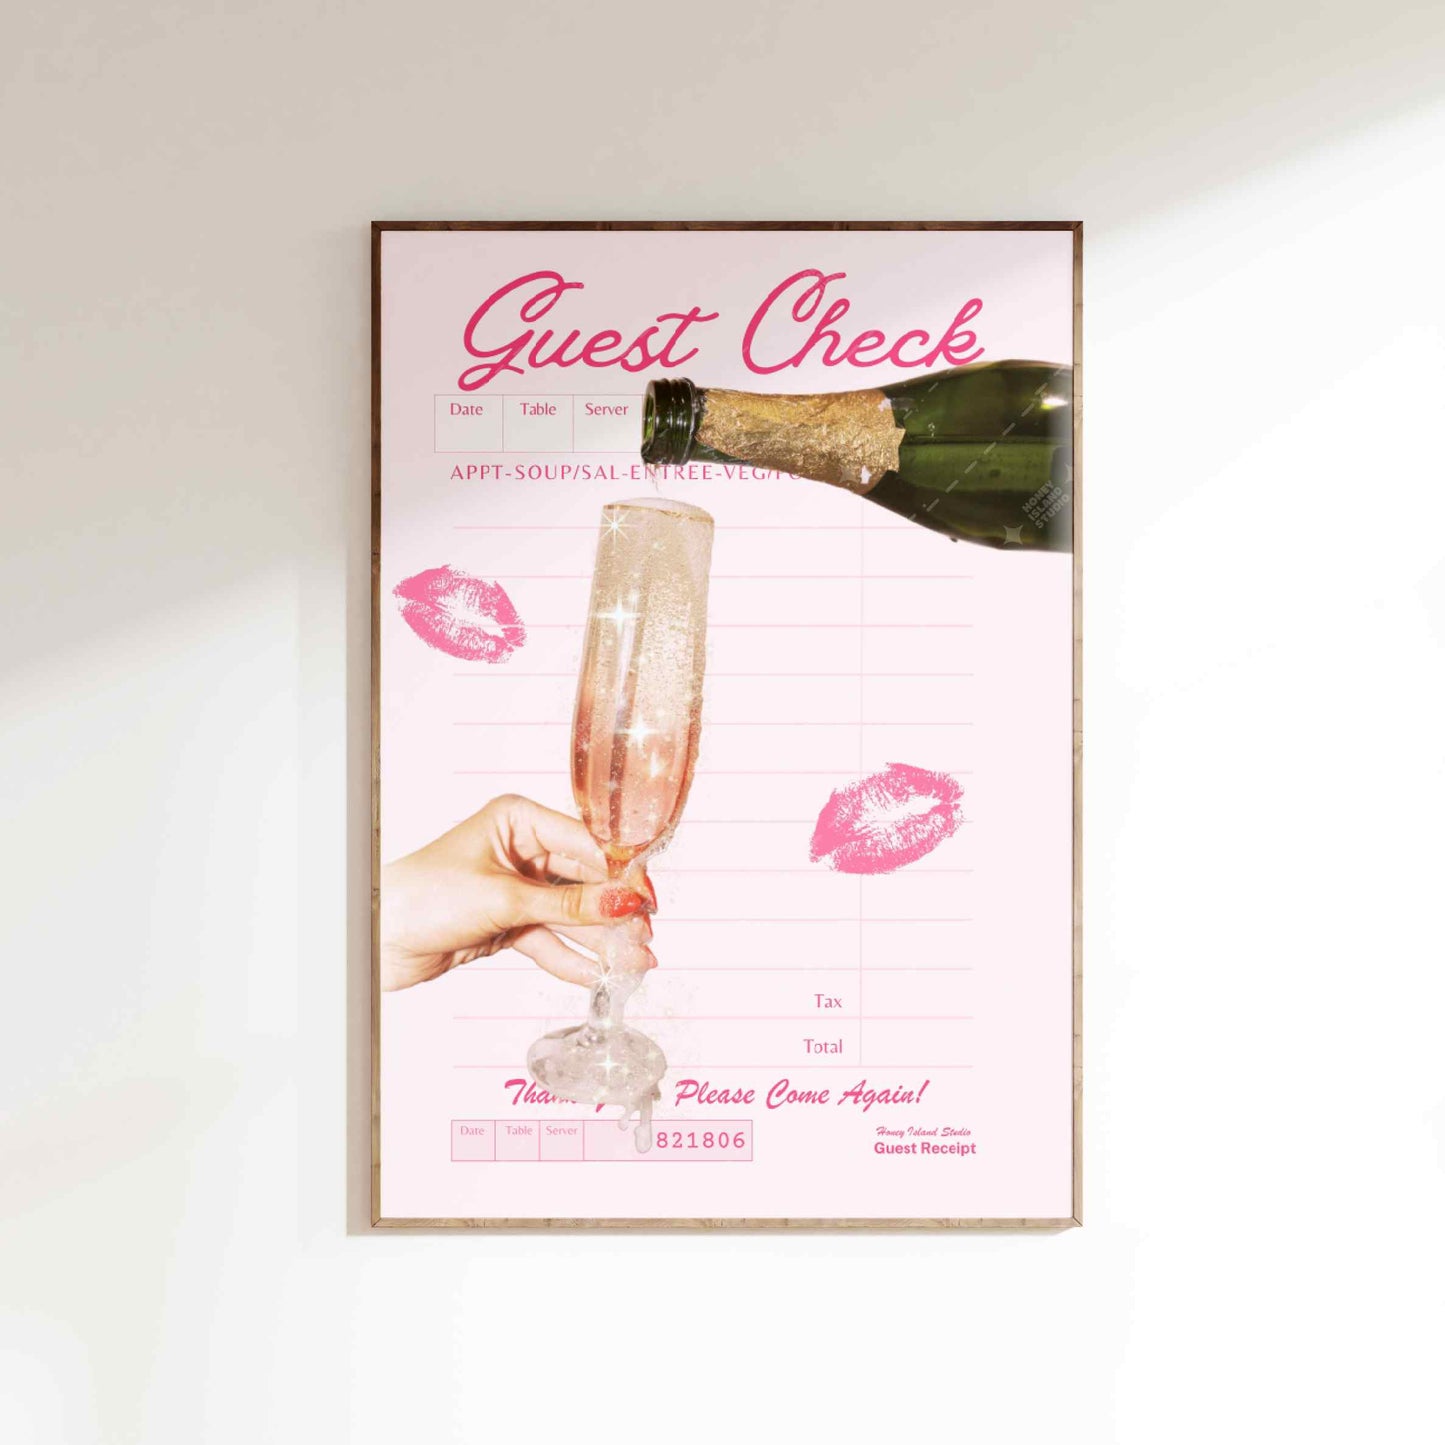 Guest Check Champagne - Poster